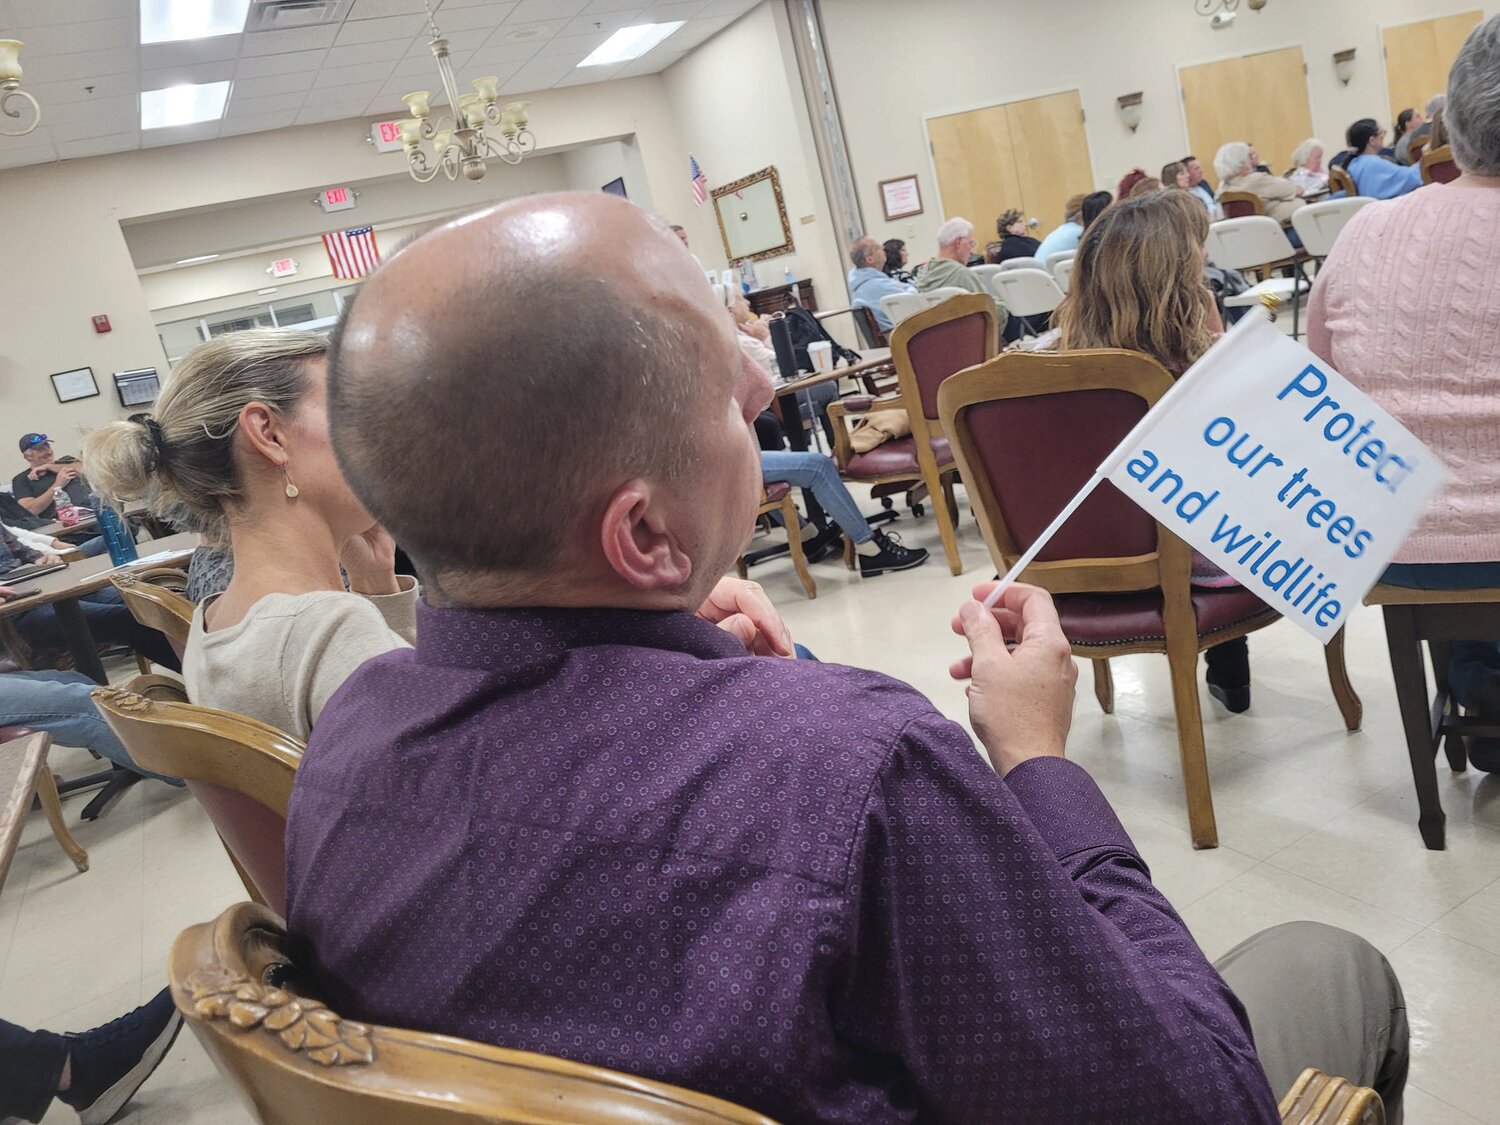 SIGNS OF THE TIMES: Johnston residents held tiny flags decrying “Not In My Backyard” and urging the board to “Protect Our Trees and Wildlife.”